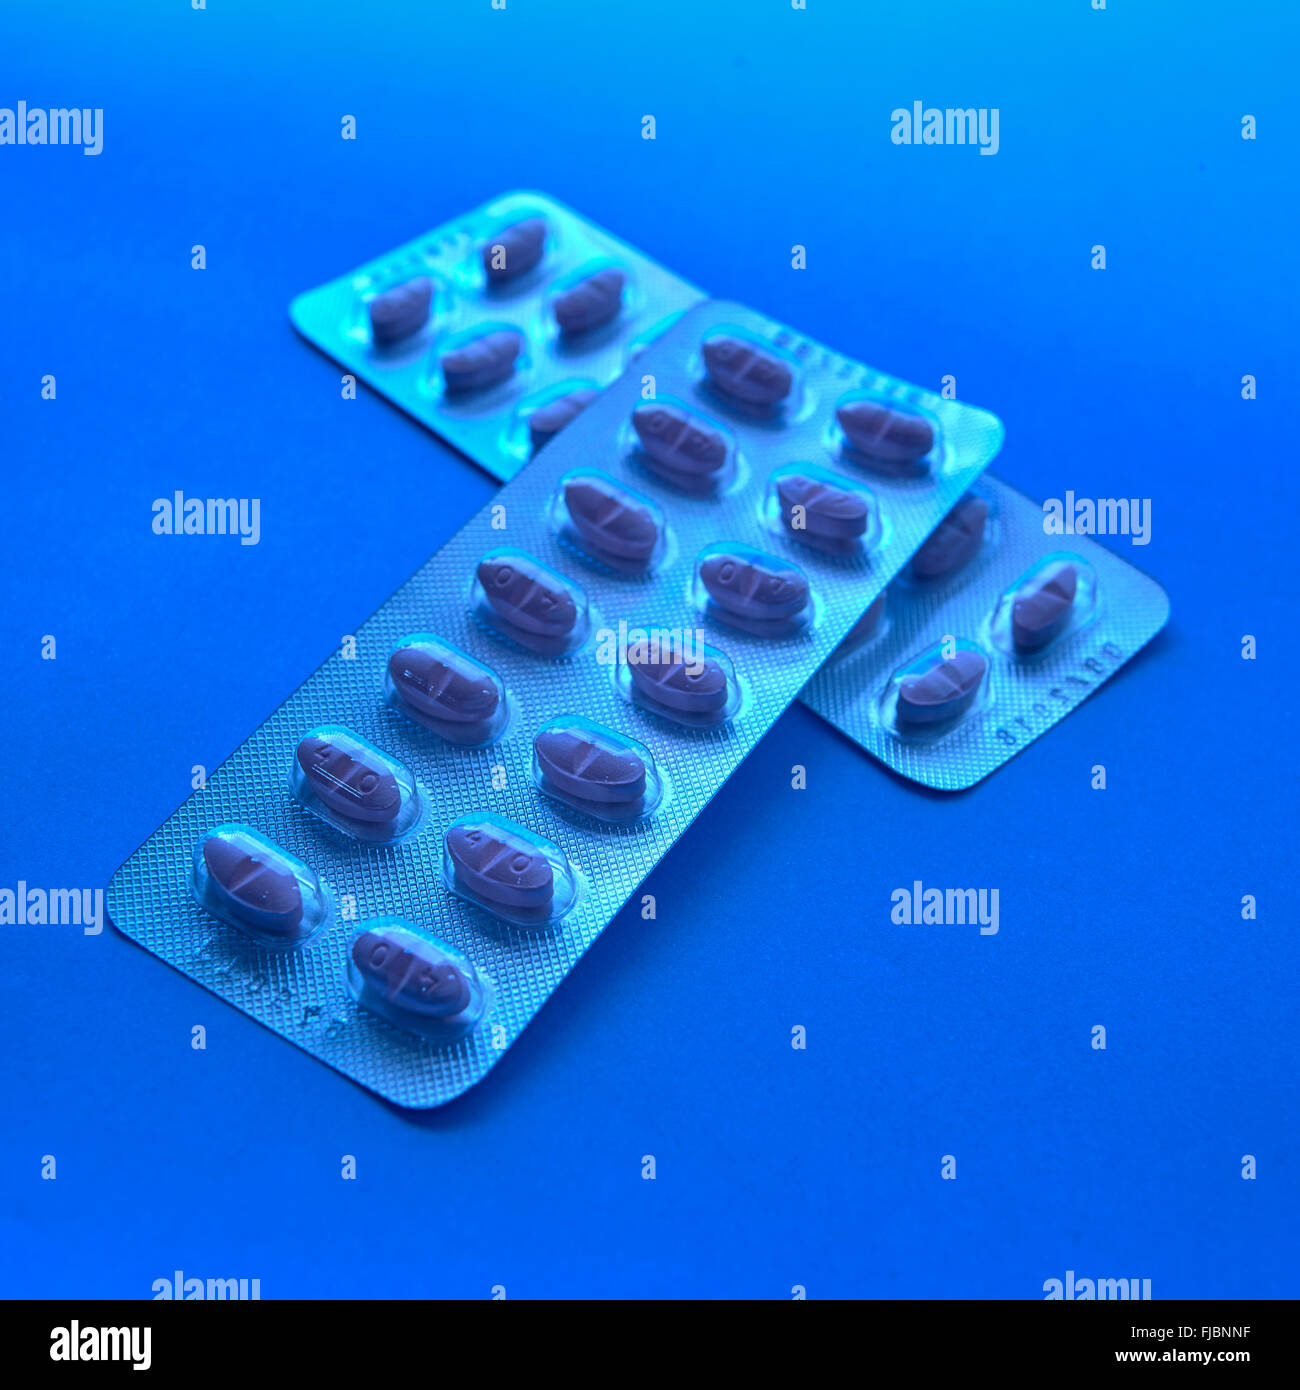 Statins, cholesterol lowering drugs, in blister packaging on blue background Stock Photo